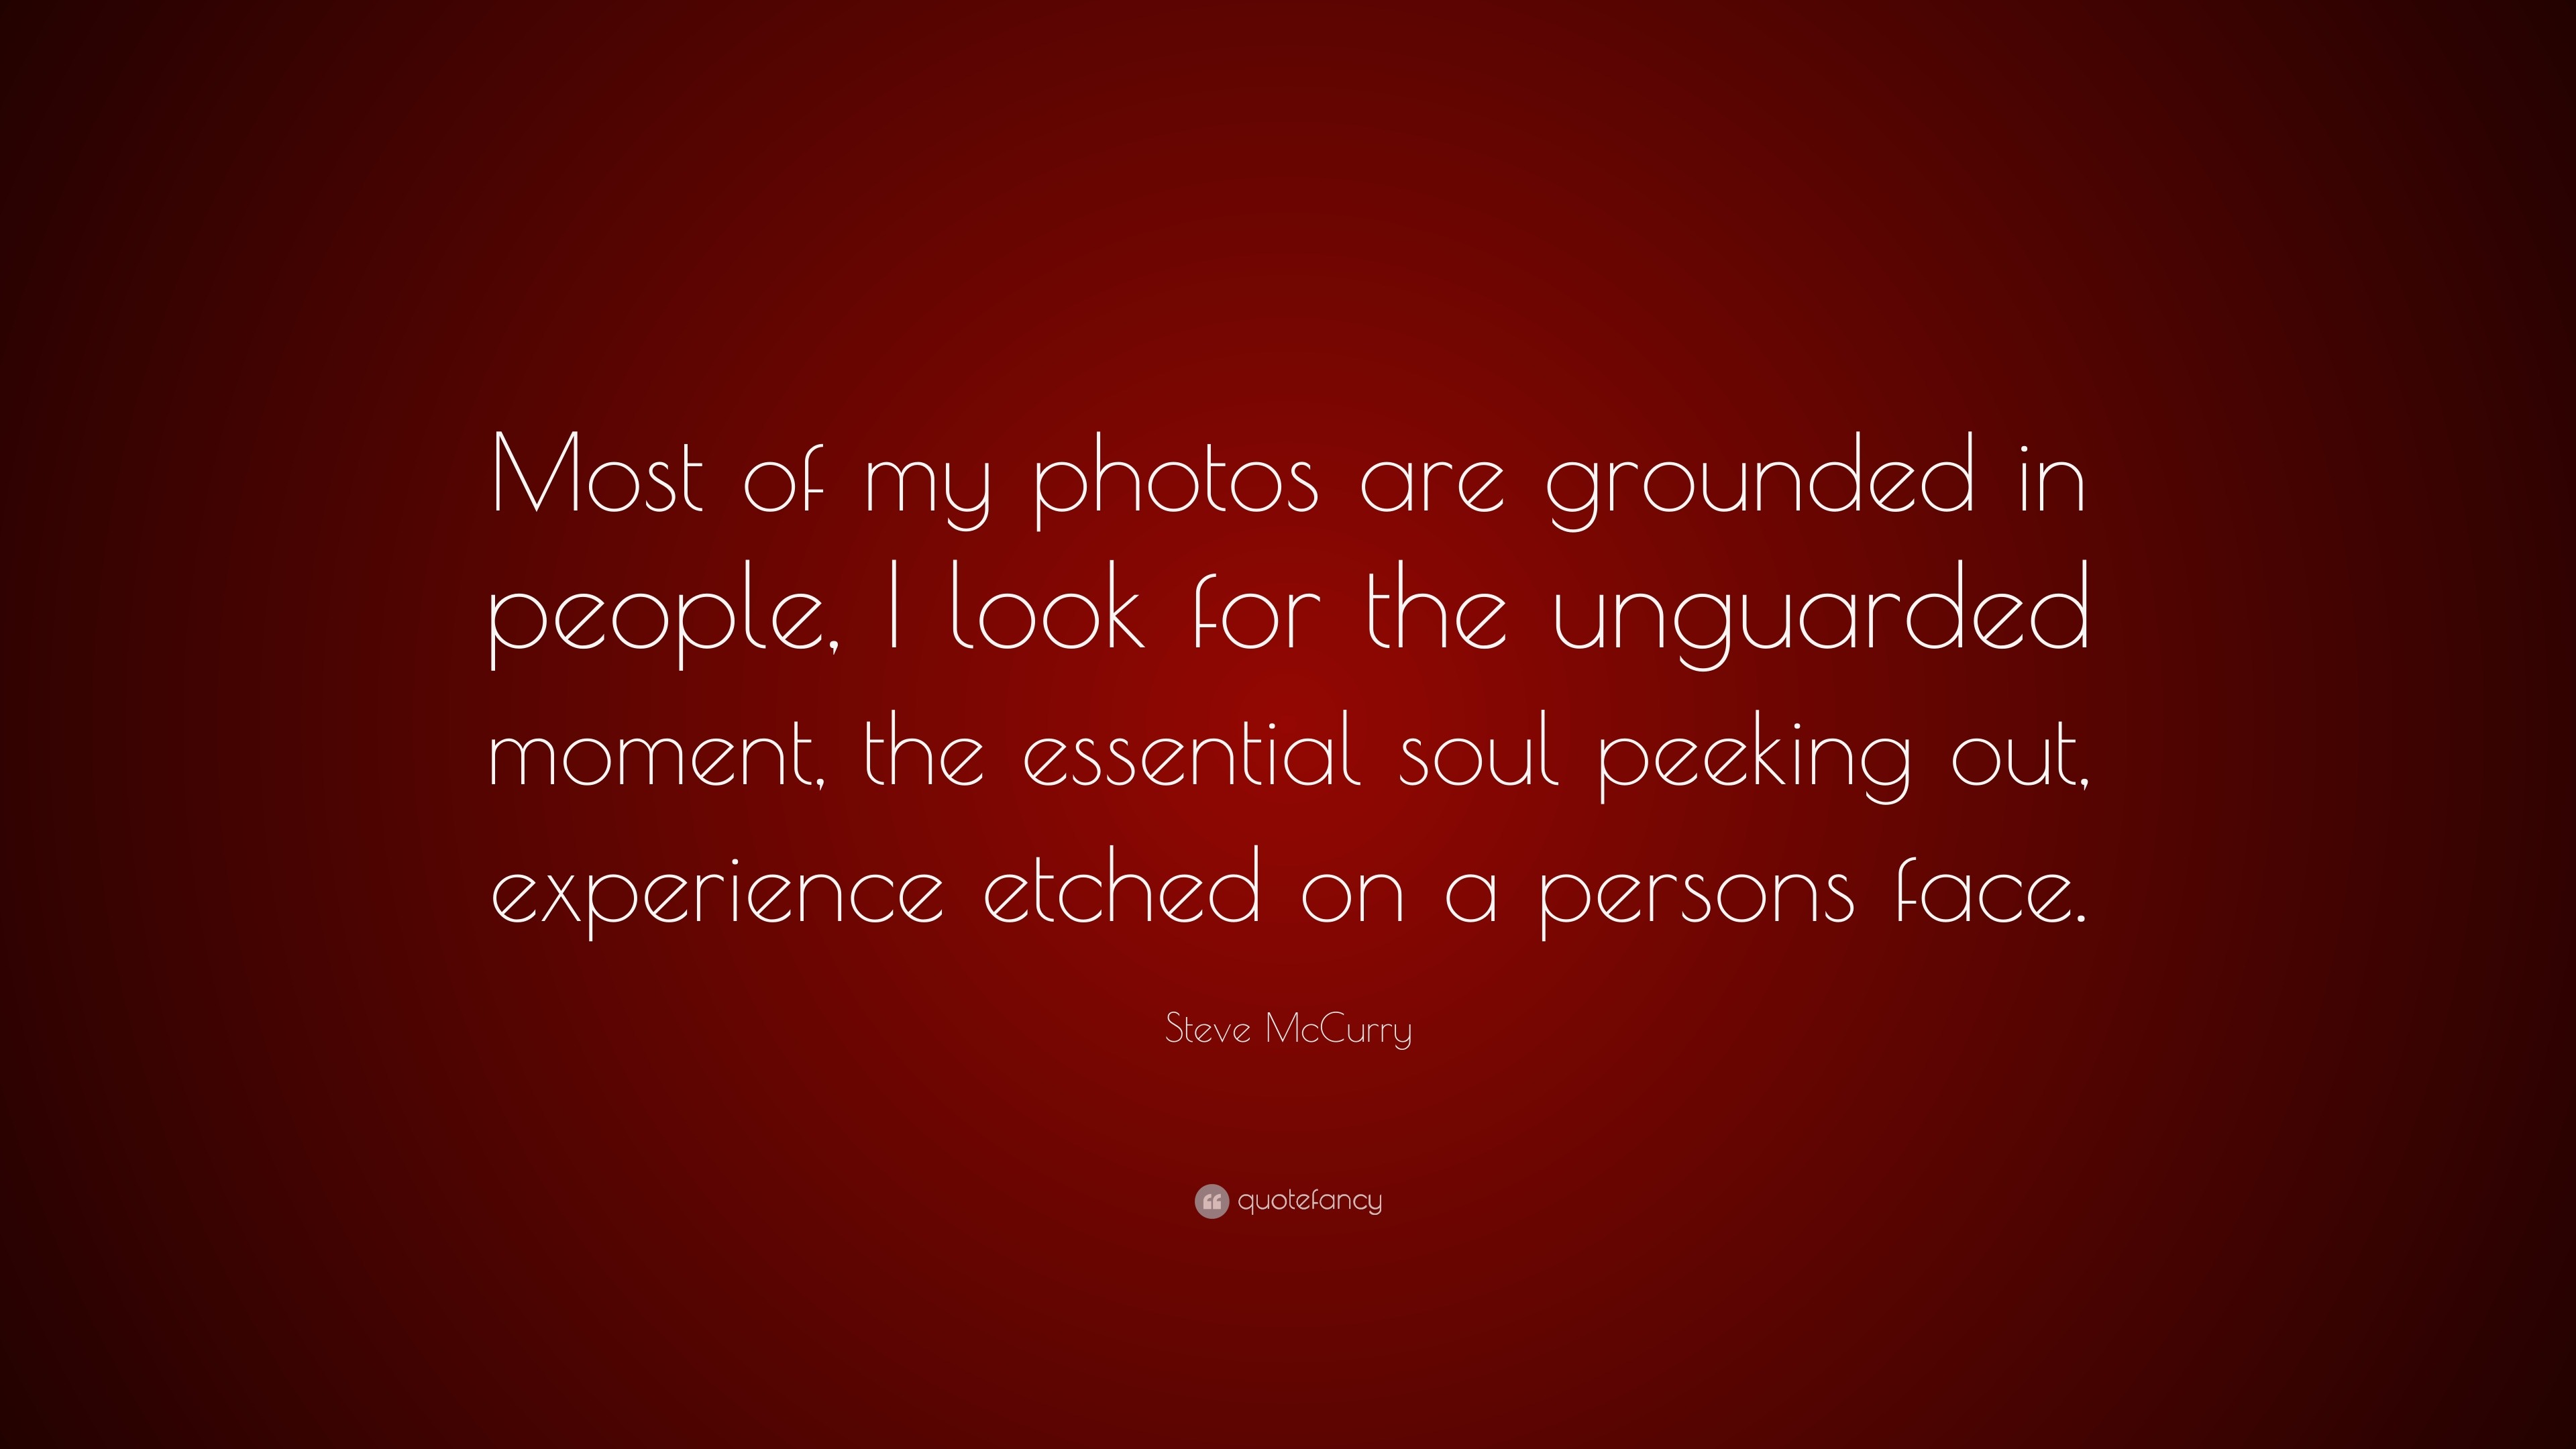 Steve McCurry Quote: “Most of my photos are grounded in people, I 